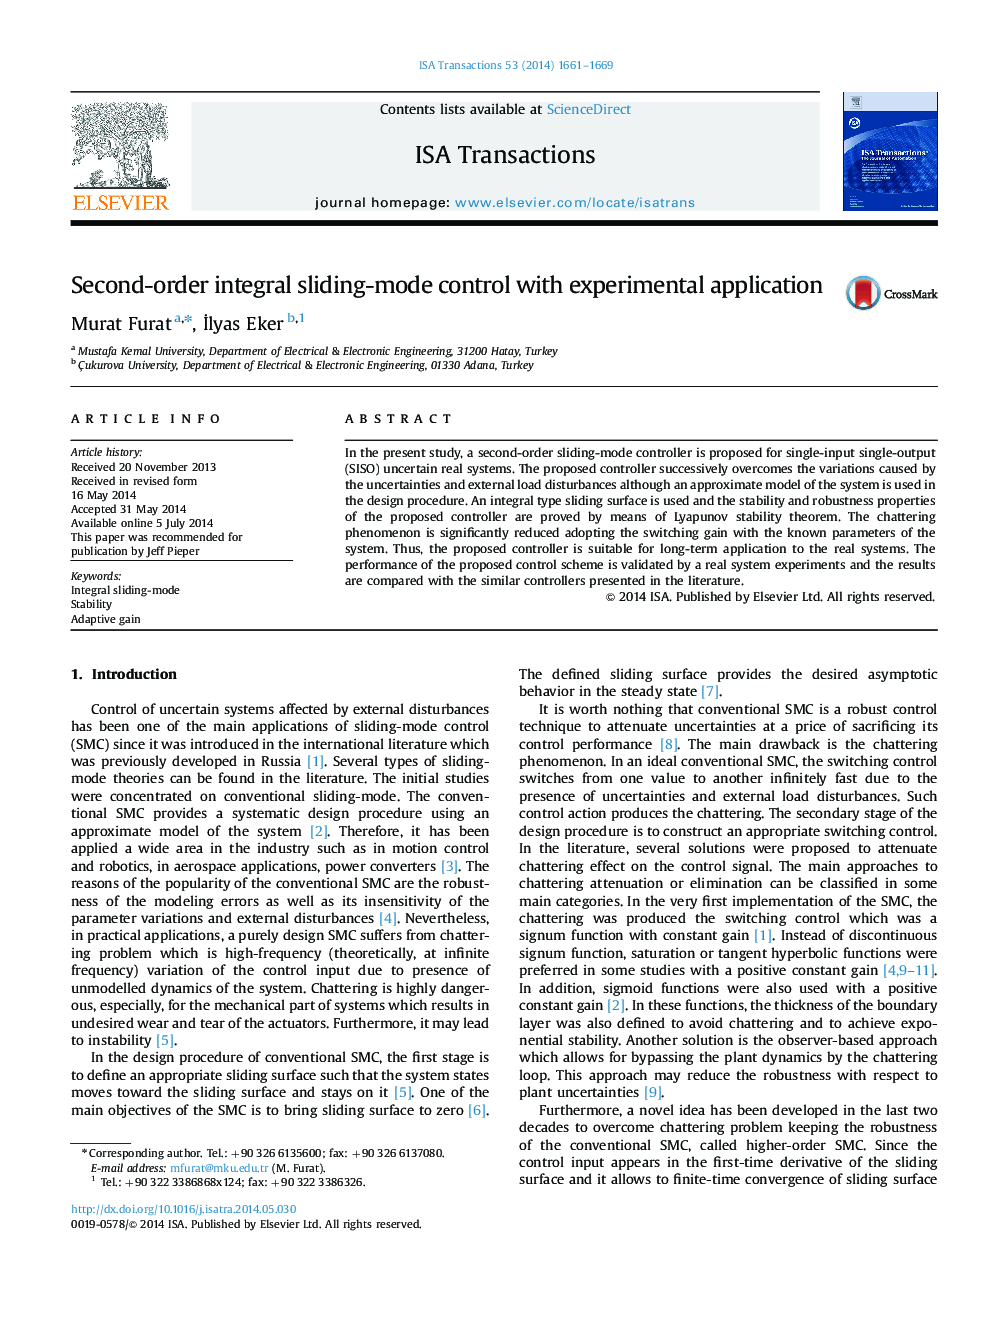 Research articleSecond-order integral sliding-mode control with experimental application